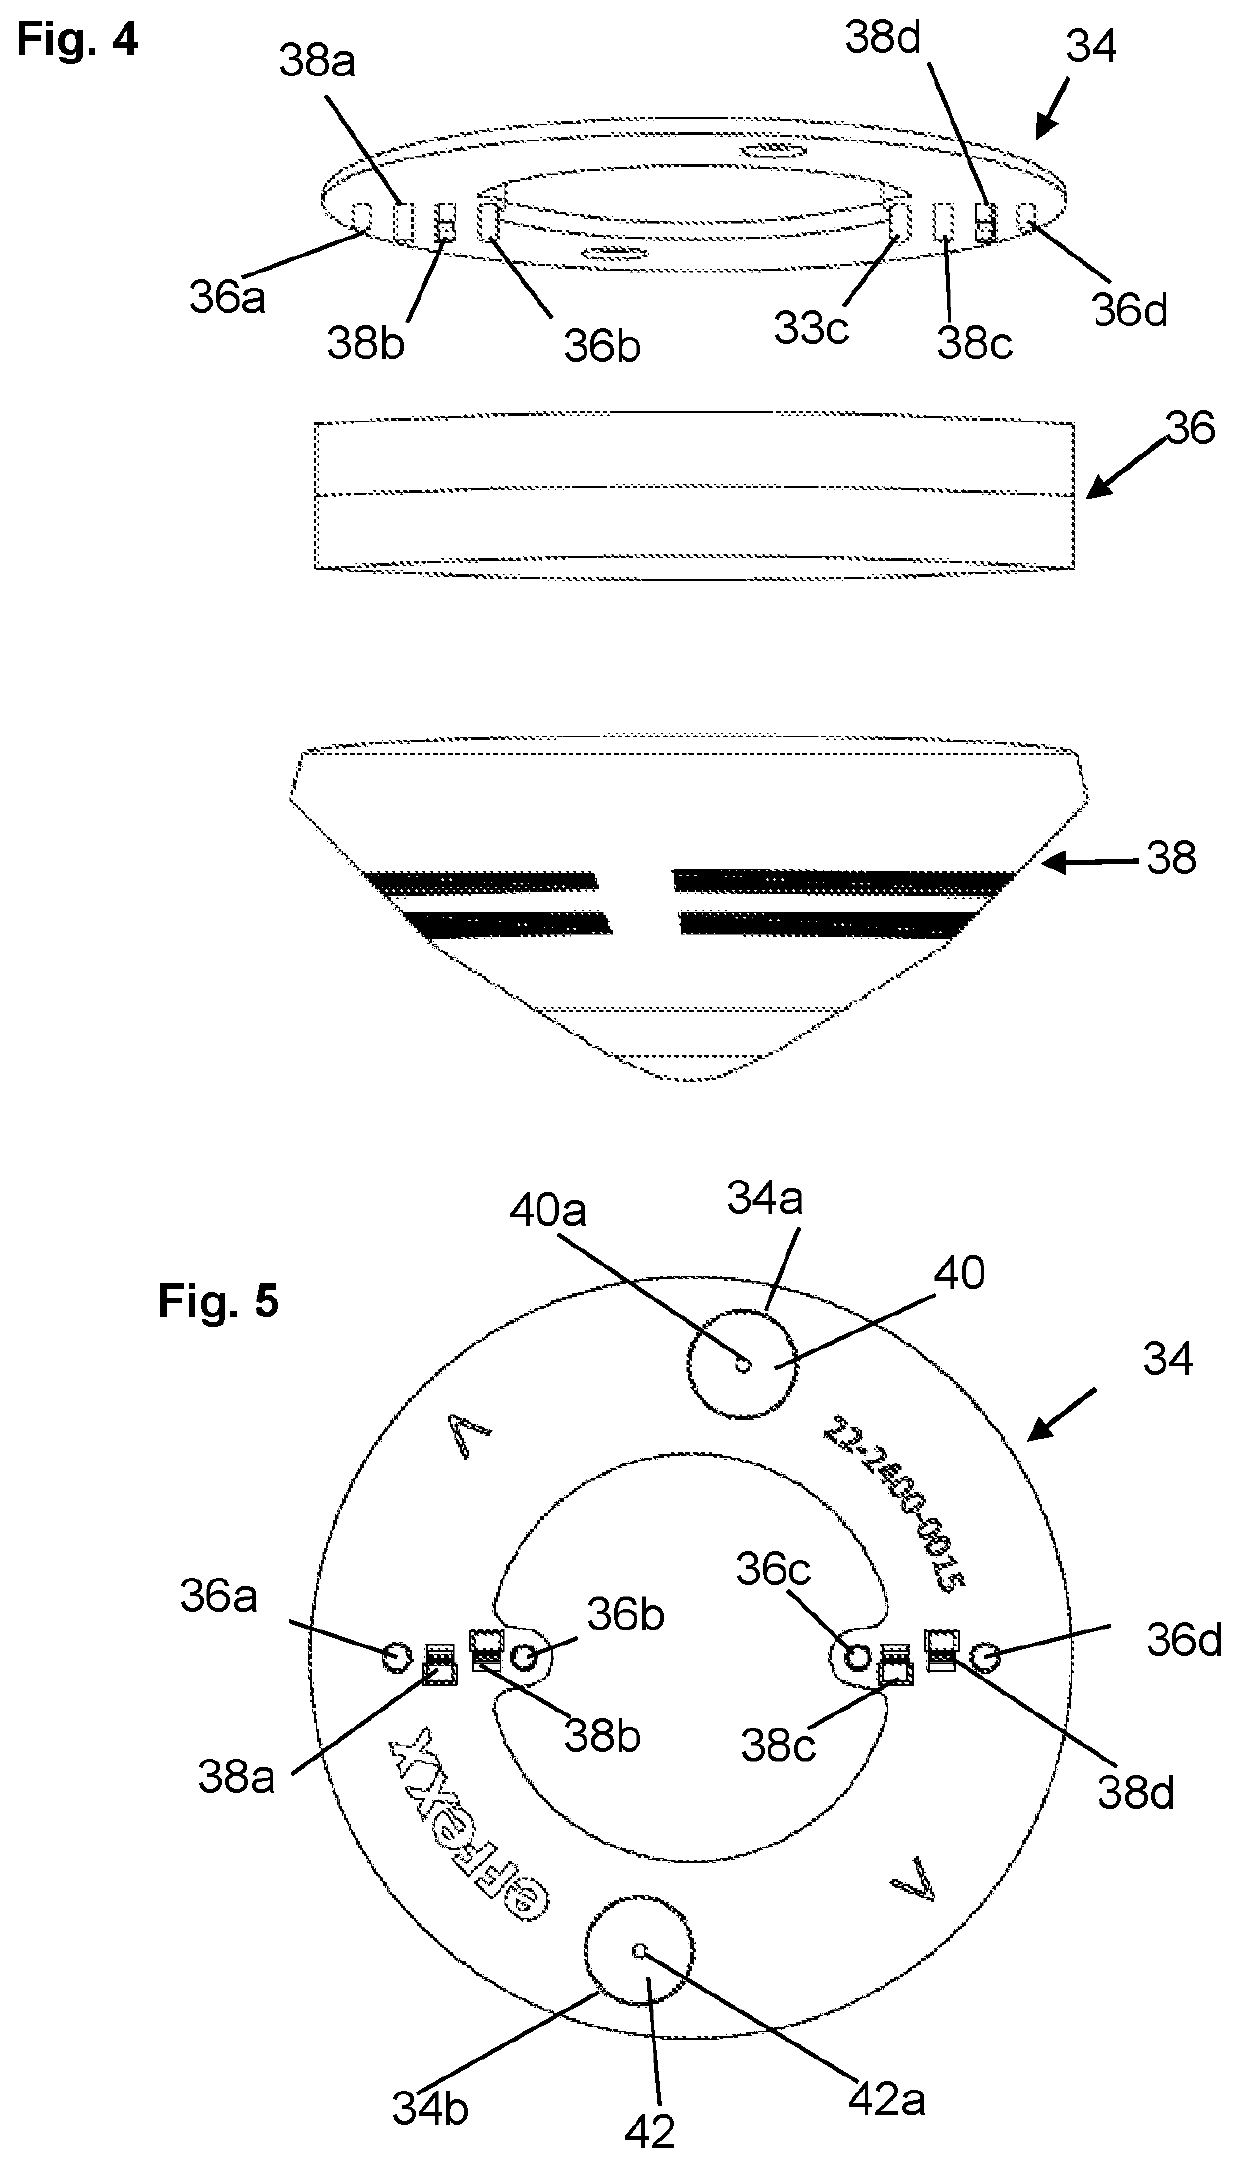 Sensor for connection to a joining partner, adaptor for installing the sensor to a joining partner and installation method for installing the sensor using the adaptor on a joining partner